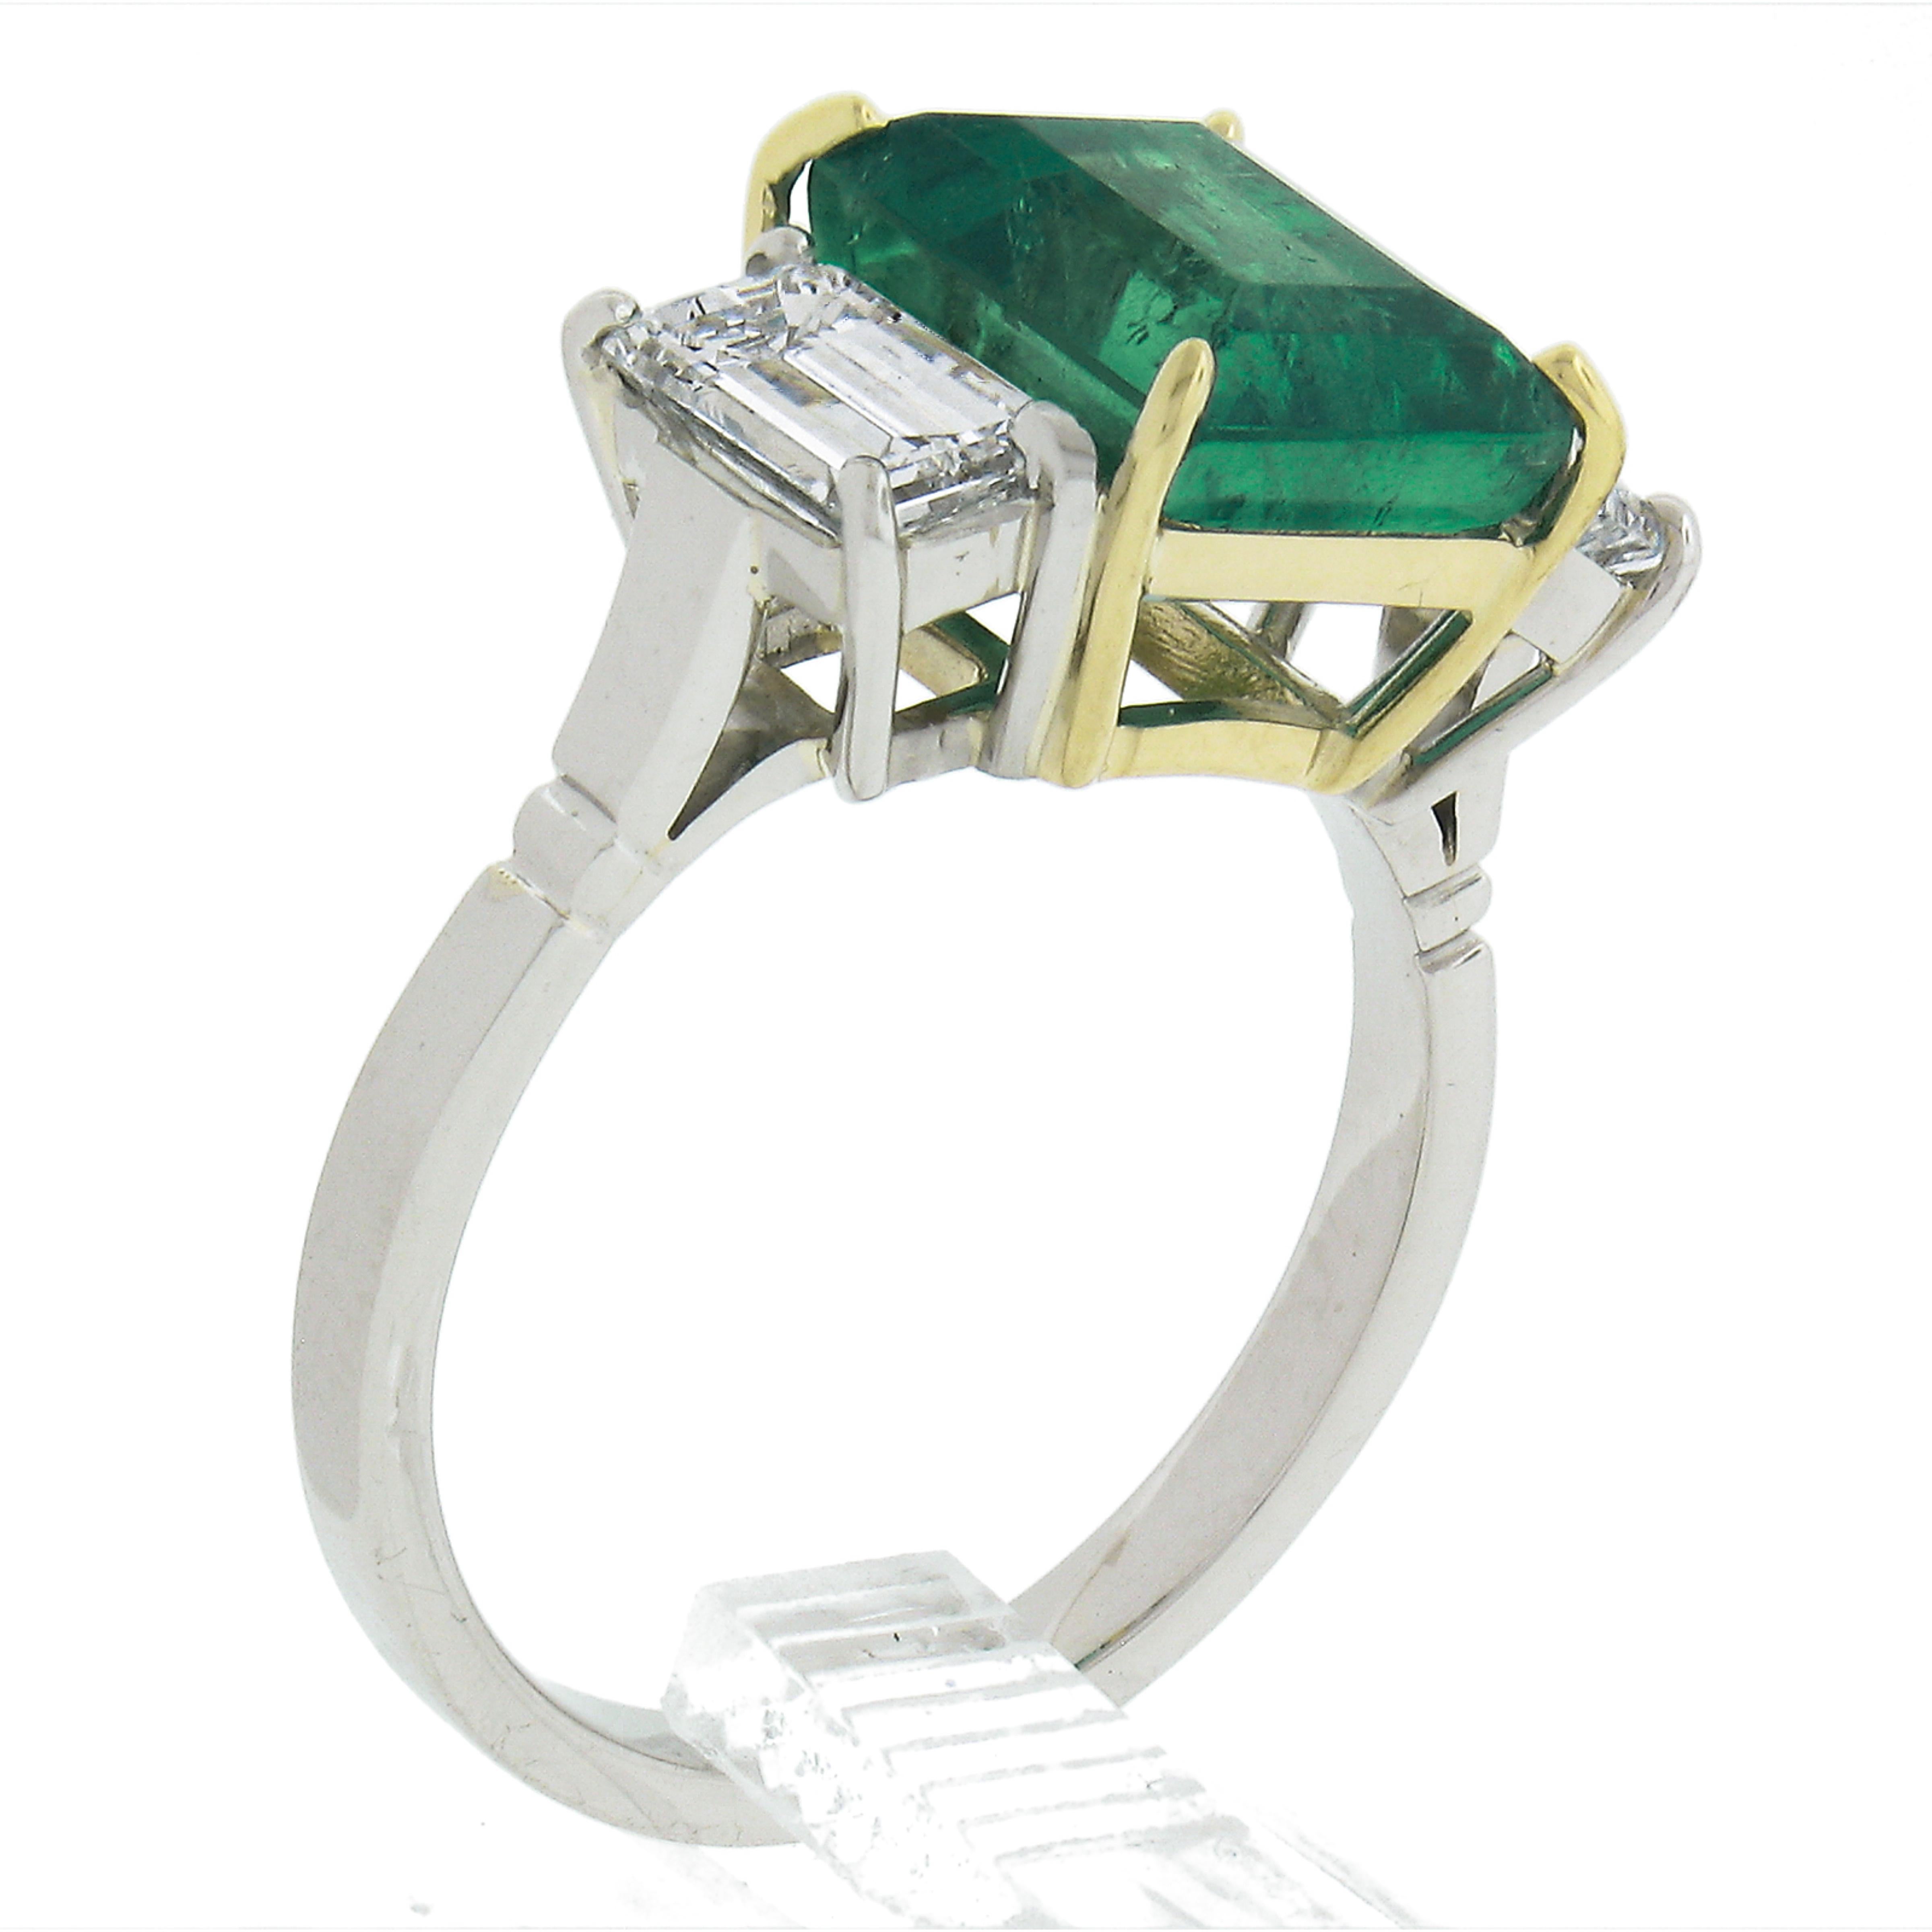 New Platinum 18k Gold 5.13ctw AGL Colombian Emerald & Gia Diamond Cocktail Ring For Sale 4